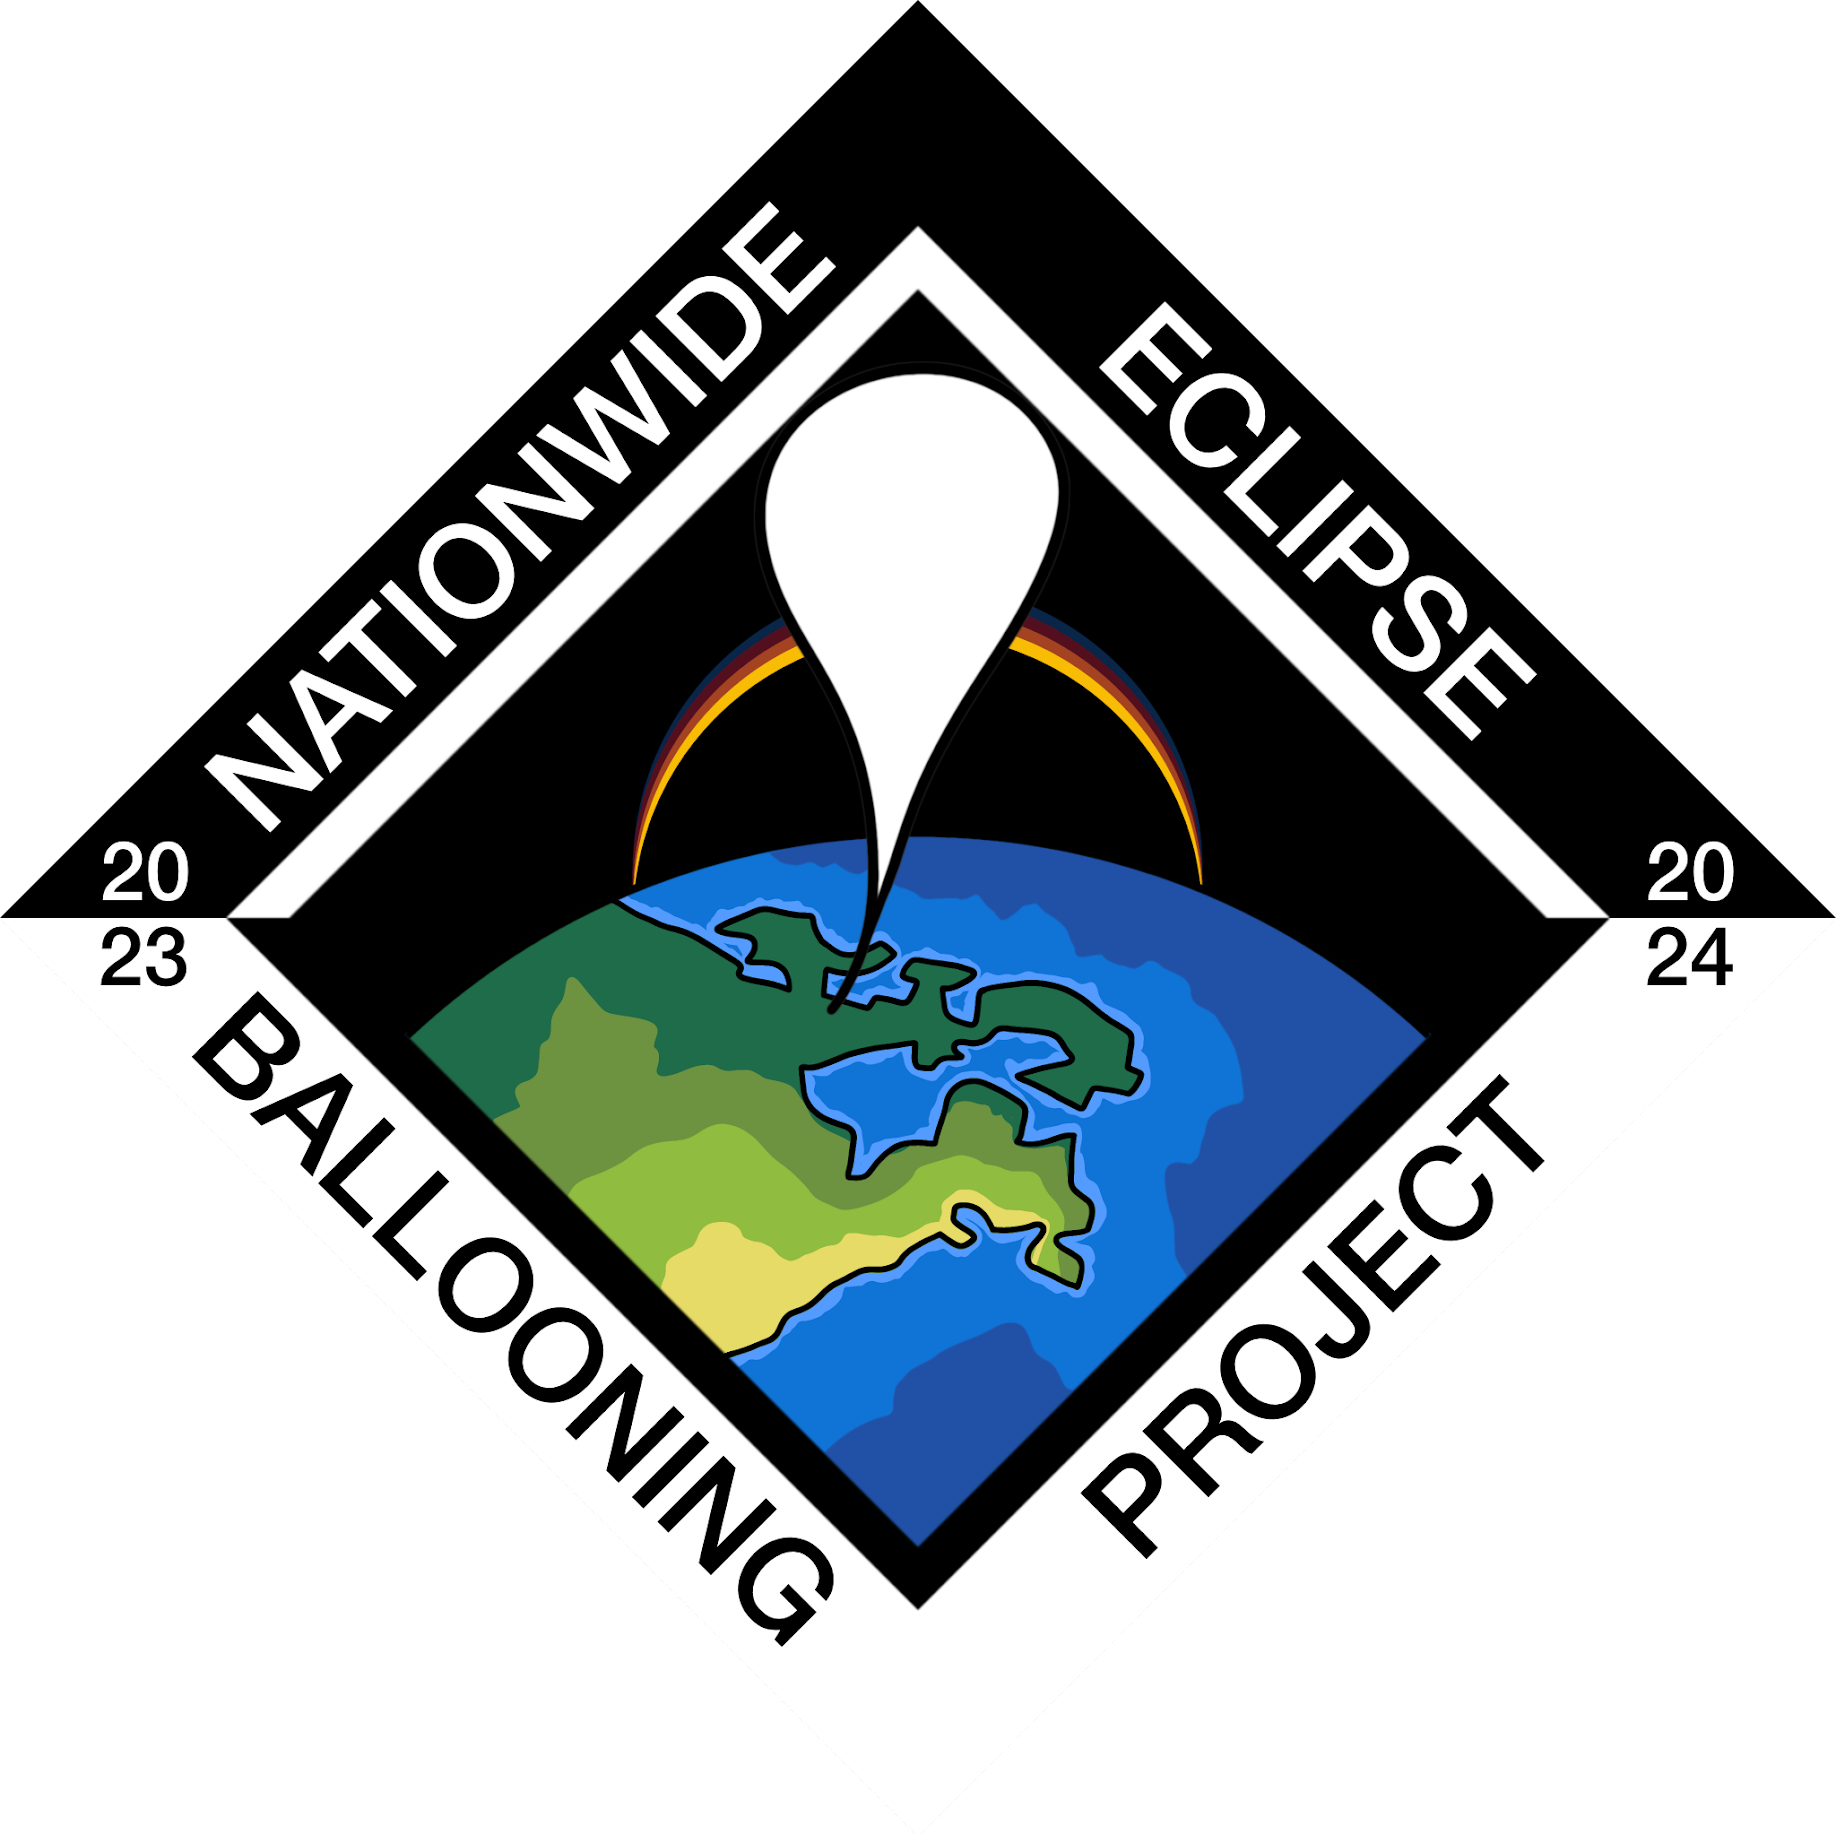 NEBP Logo; an eclipse in the background, earth in the middleground, scientific balloon flying in the foreground